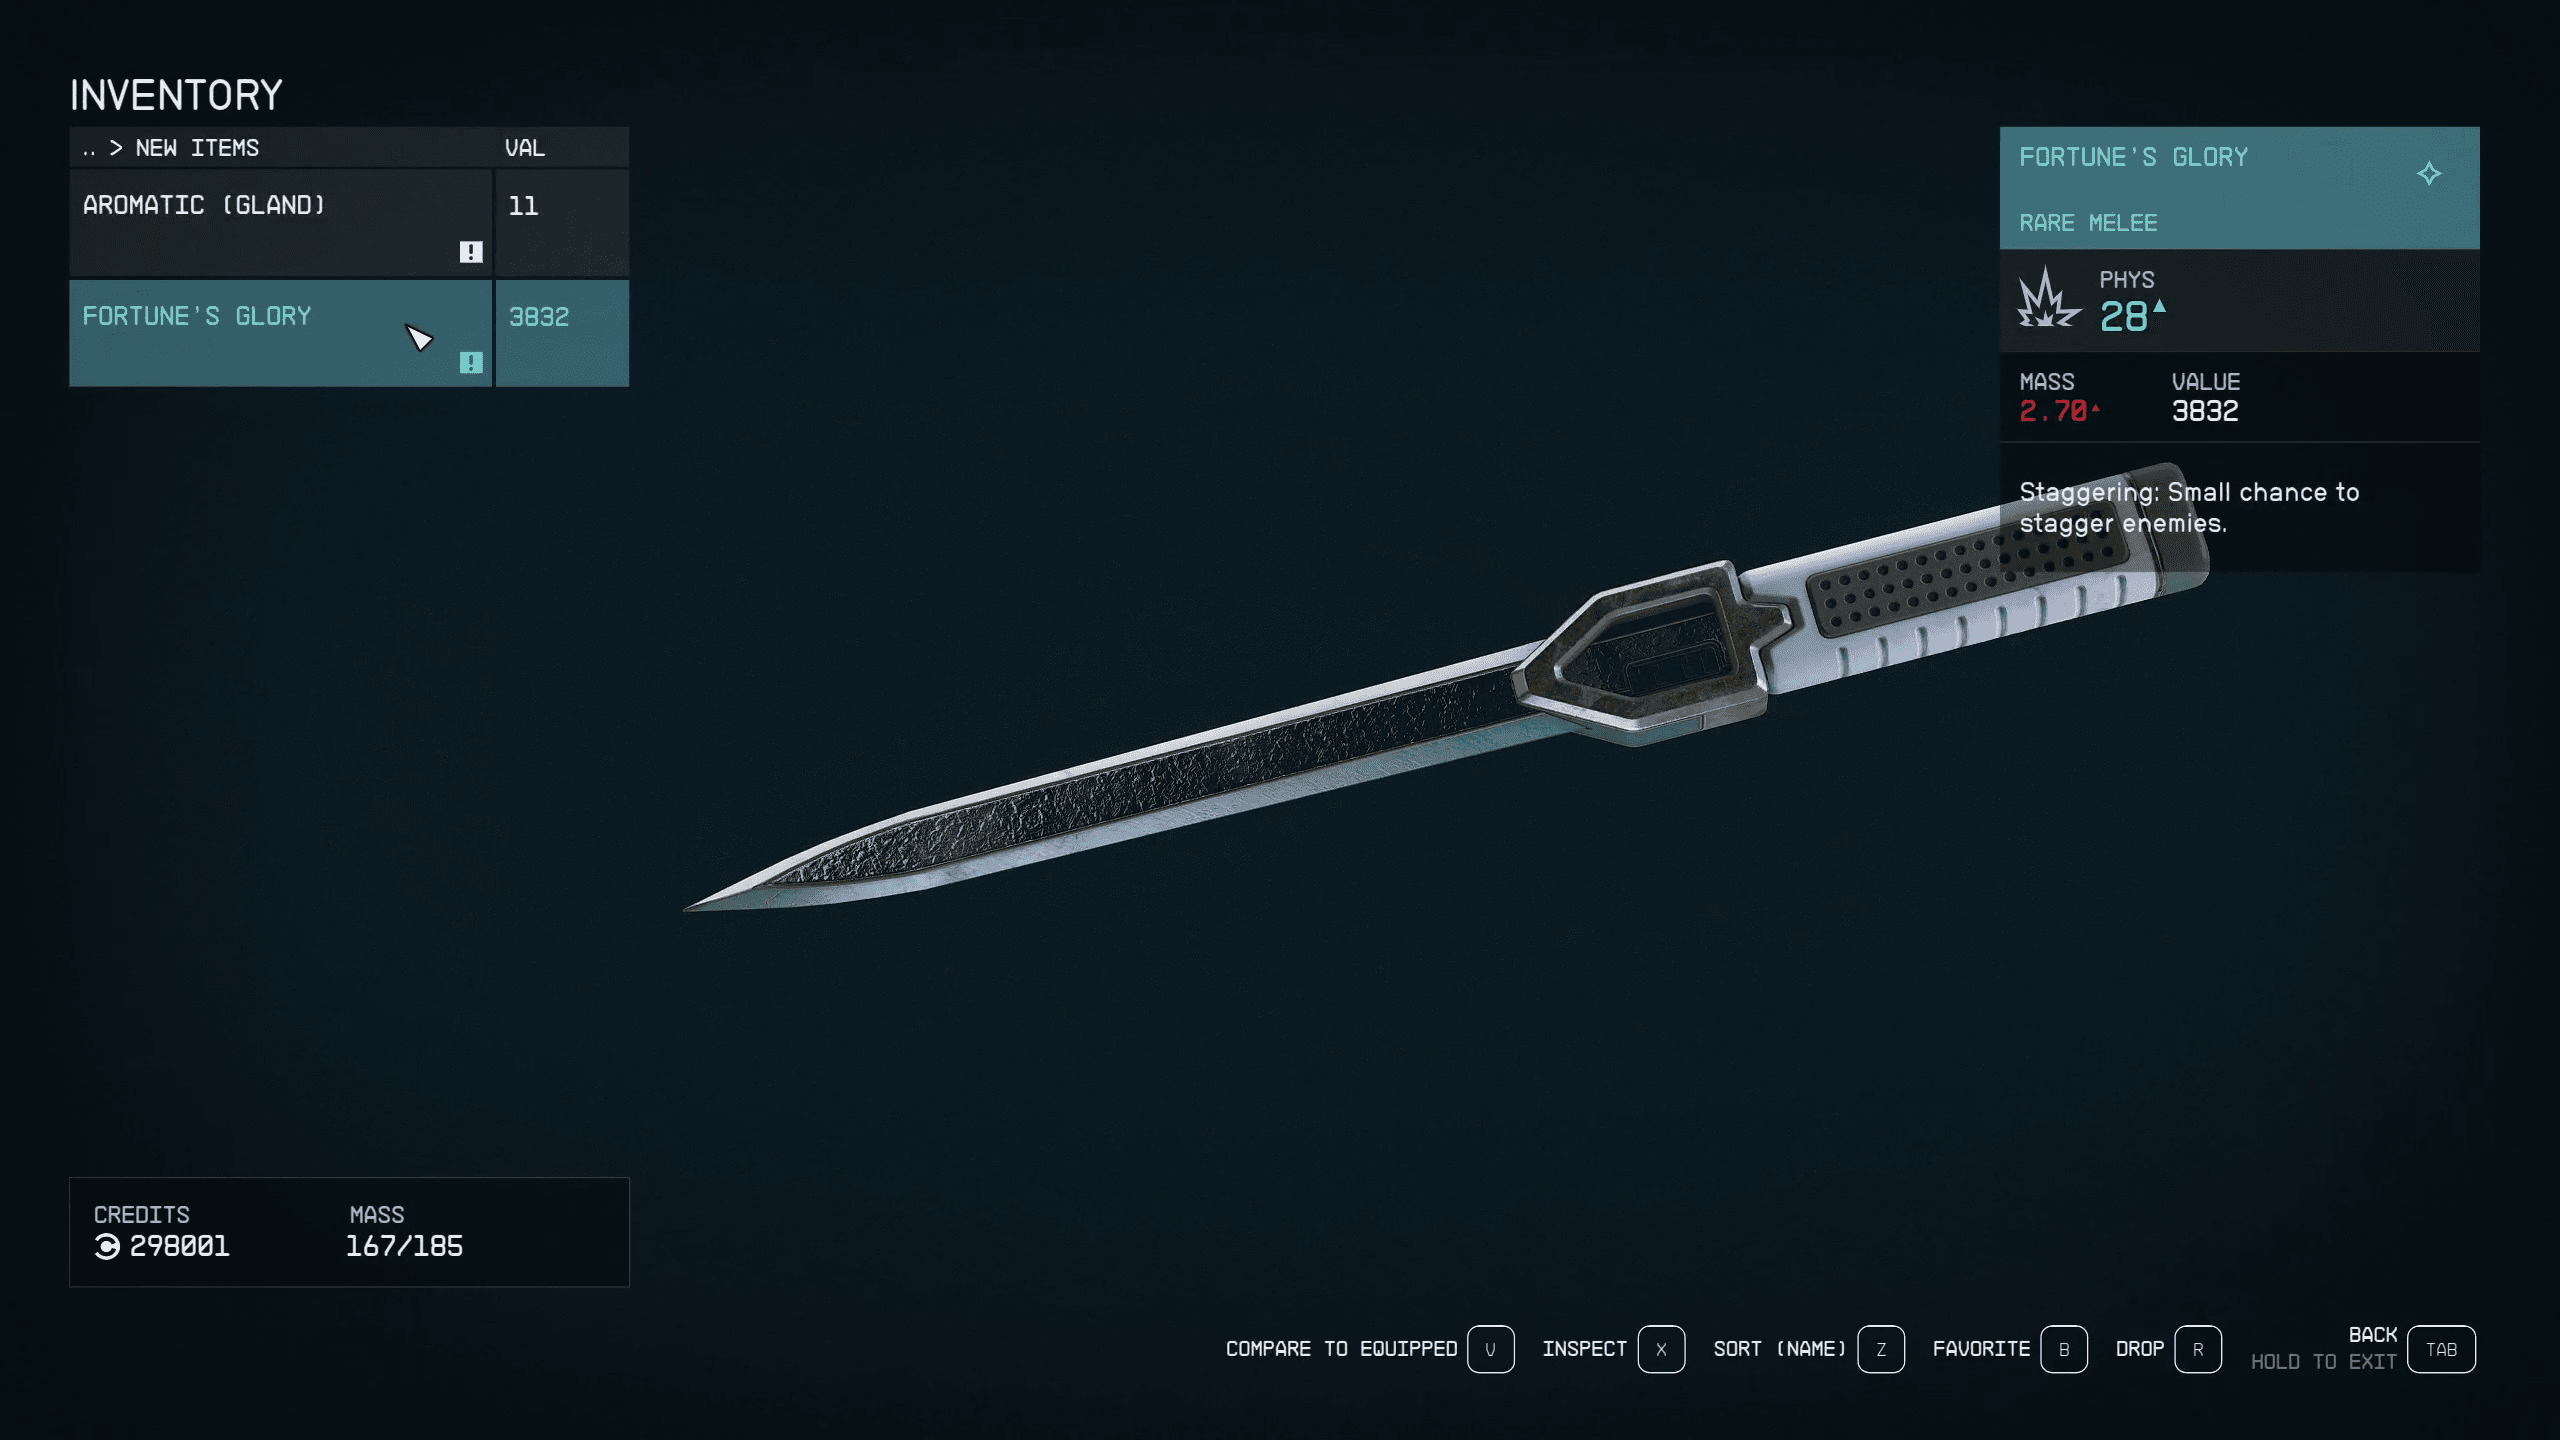 Fortune's Glory Knife